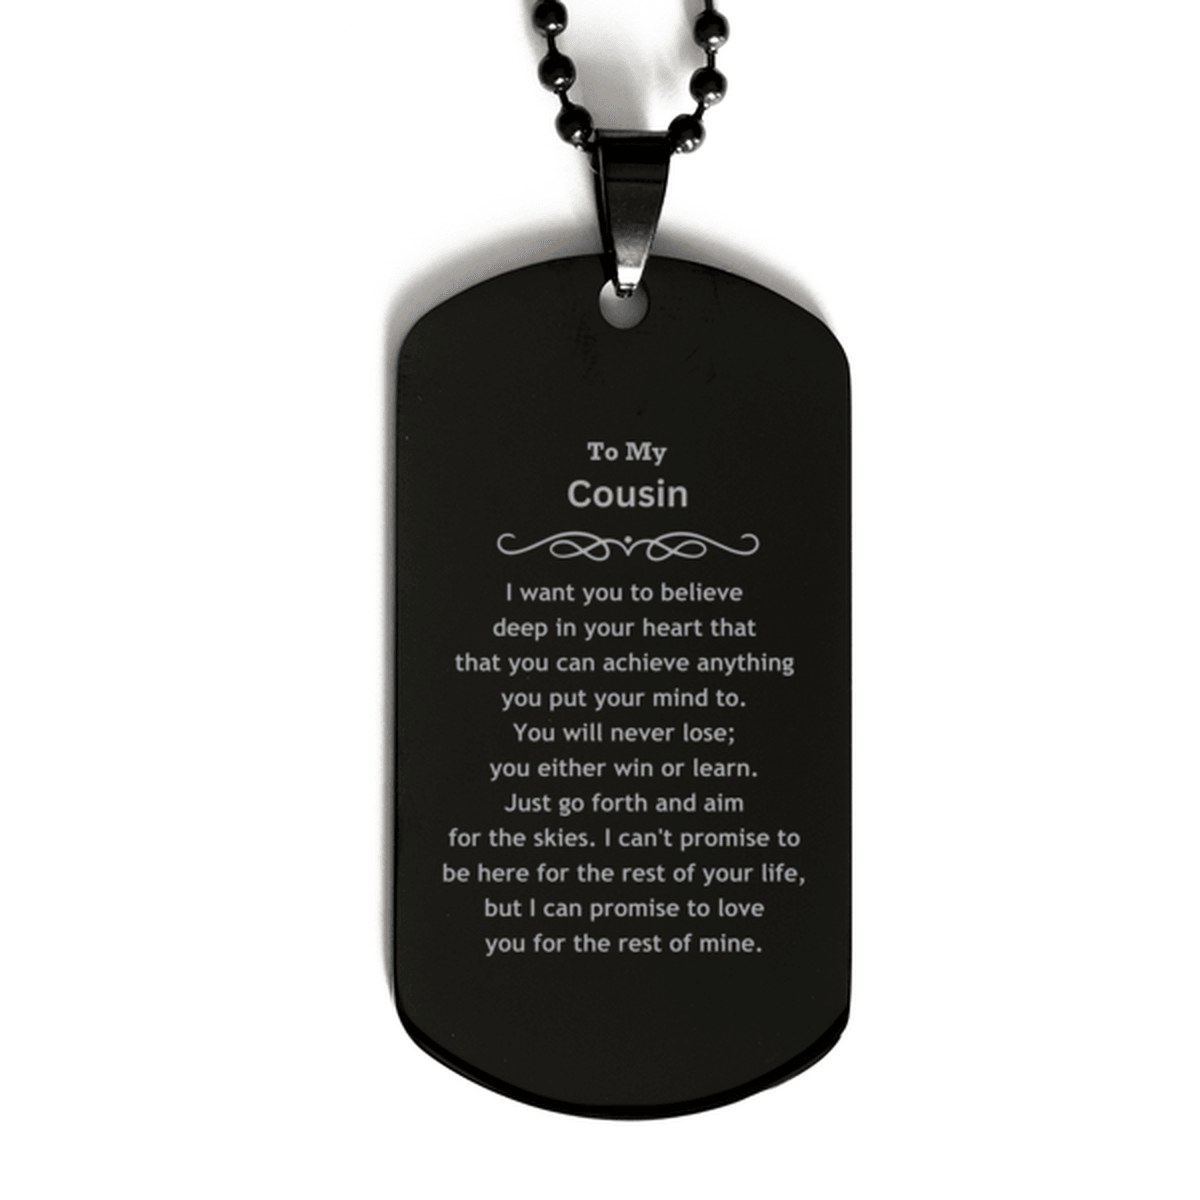 Motivational Cousin Black Dog Tag Necklace - I can promise to love you for the rest of mine, Birthday Christmas Jewelry Gift for Women Men - Mallard Moon Gift Shop